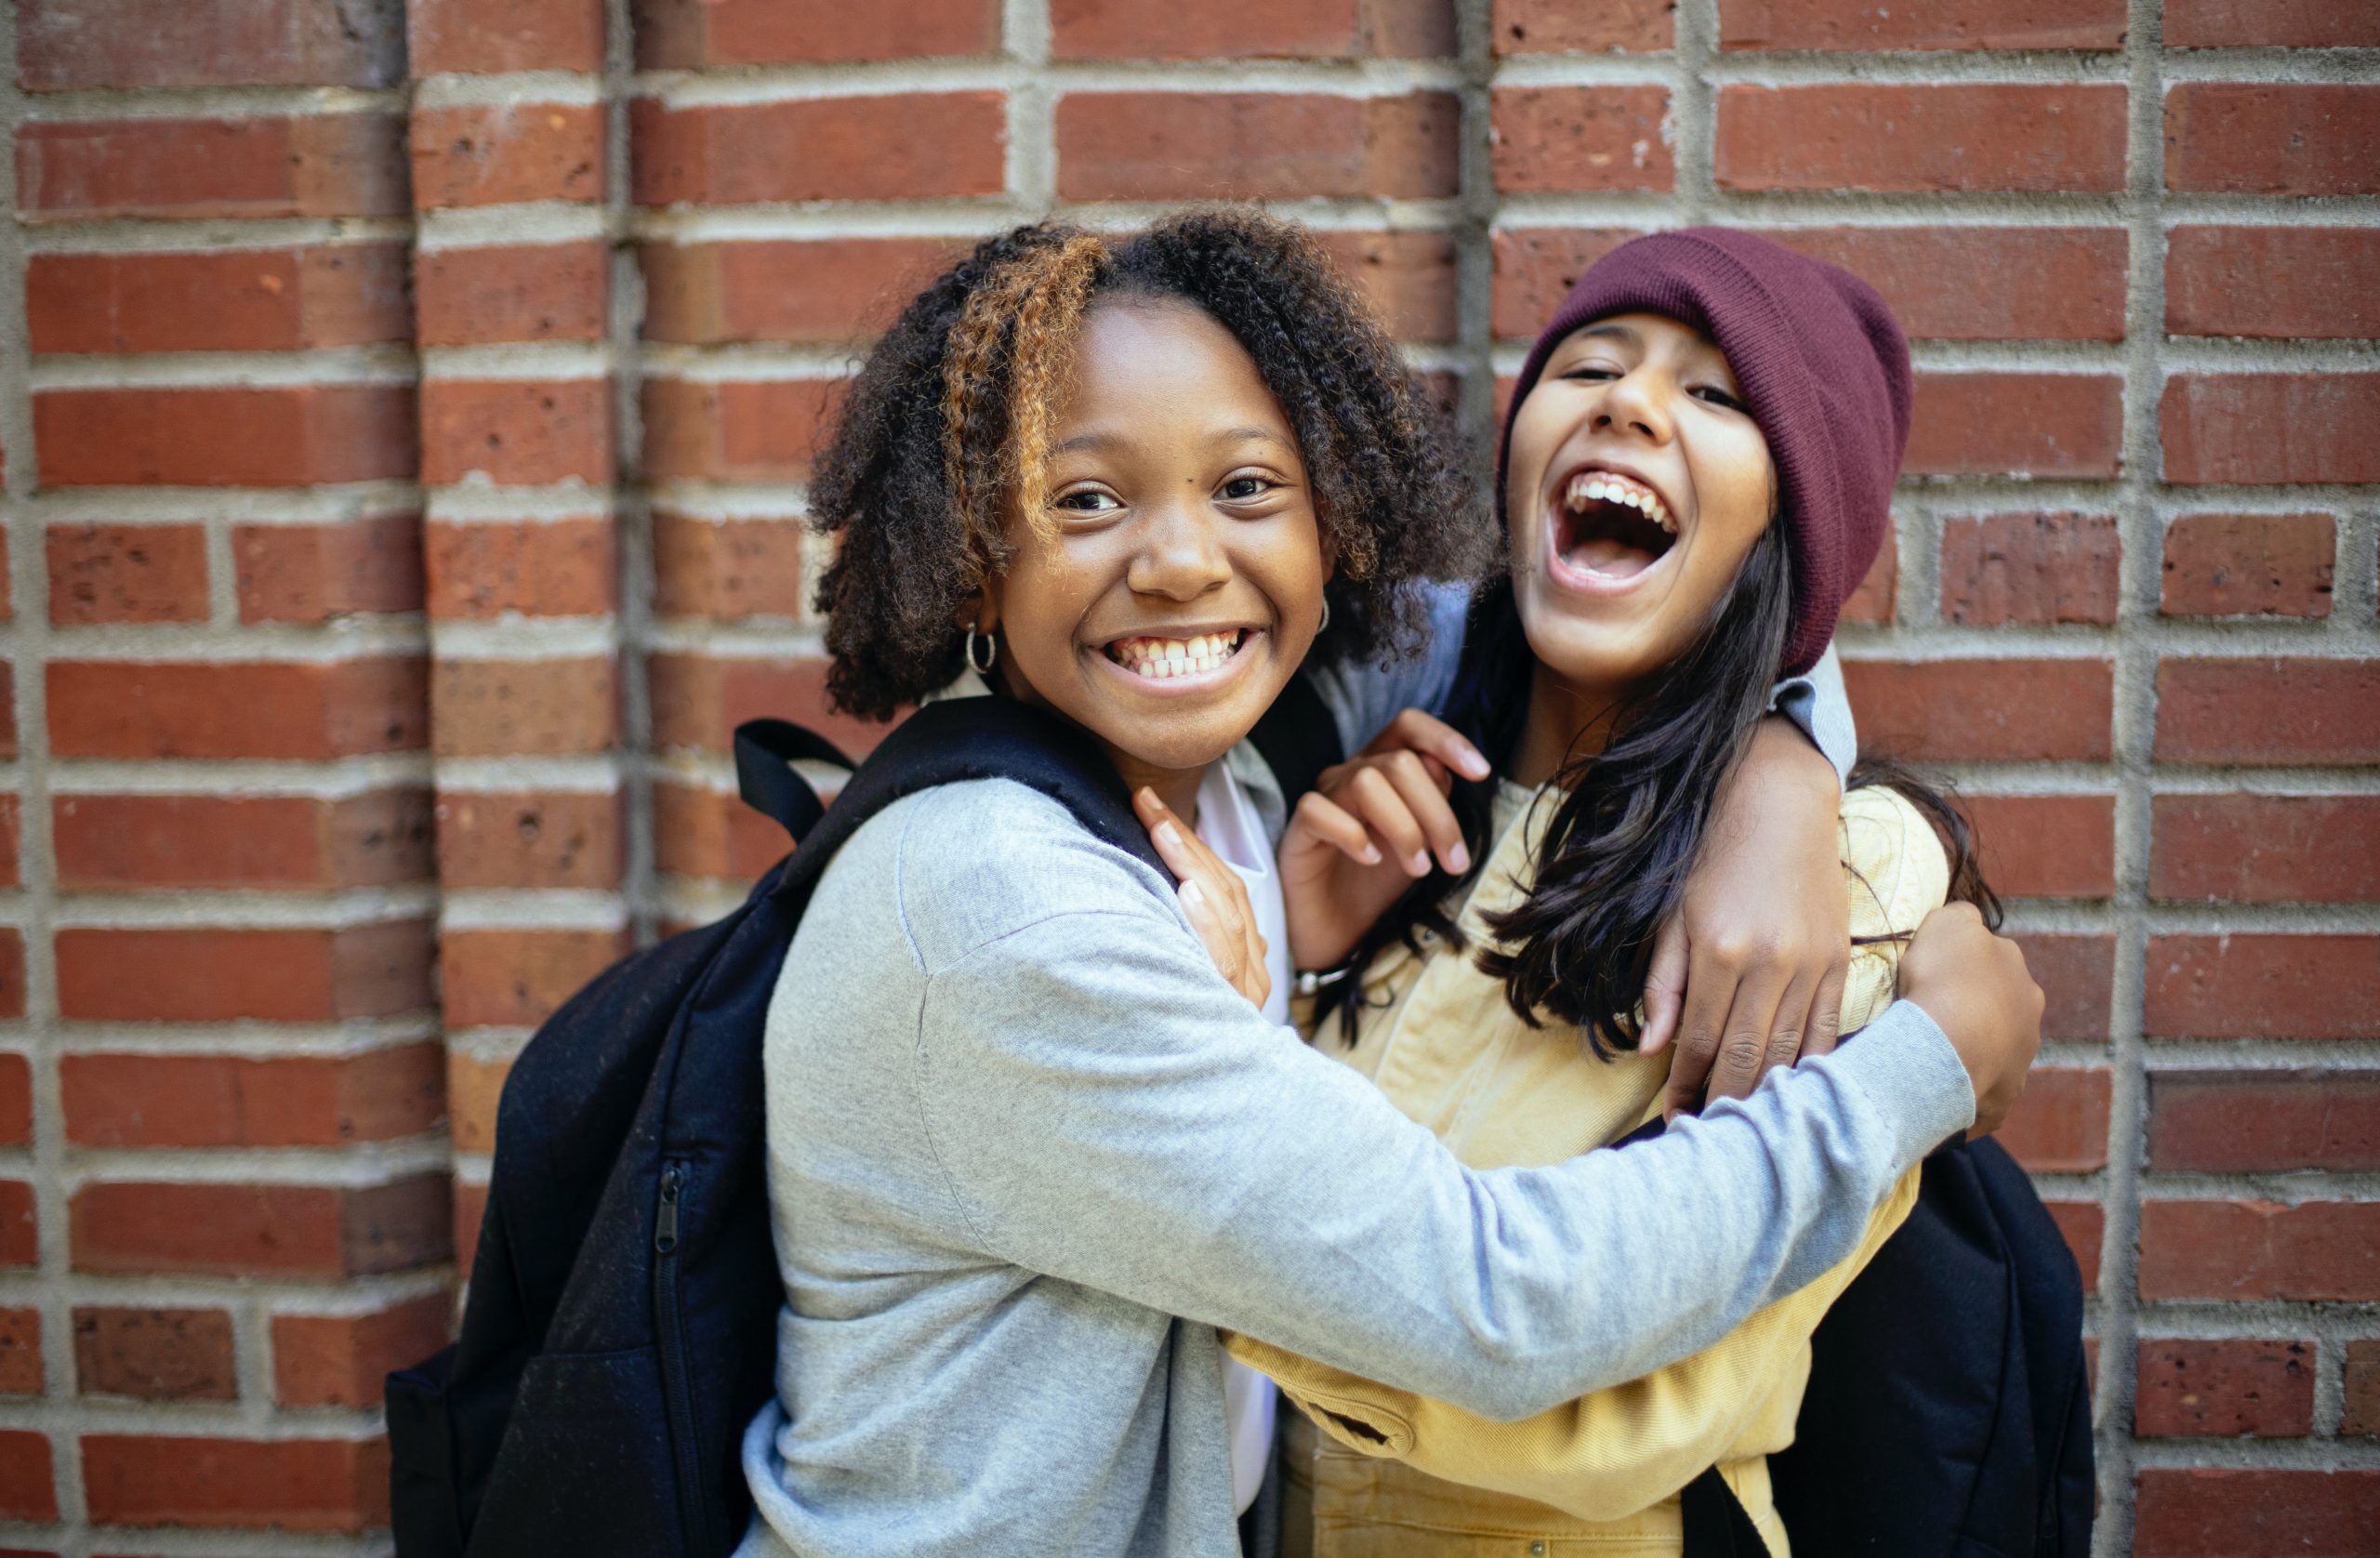 Two young people laughing and smiling.